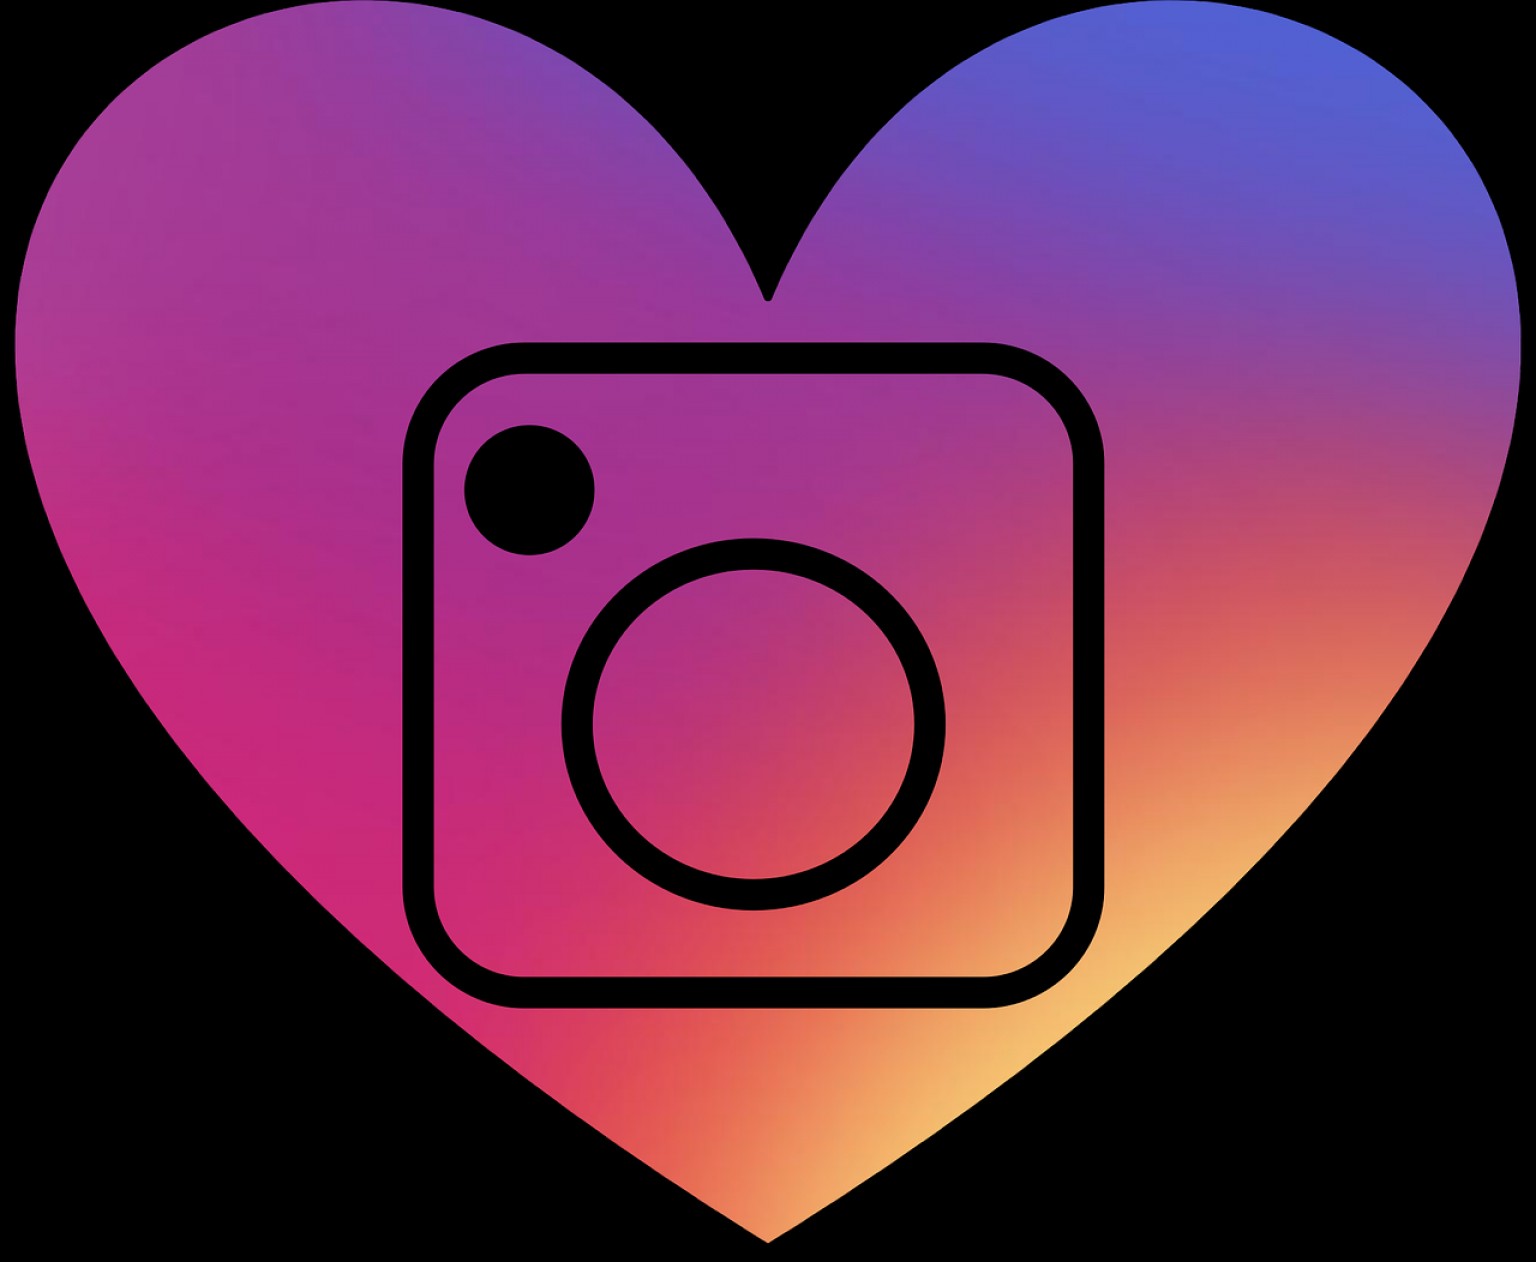 Download Instagram Heart Vector at Vectorified.com | Collection of ...